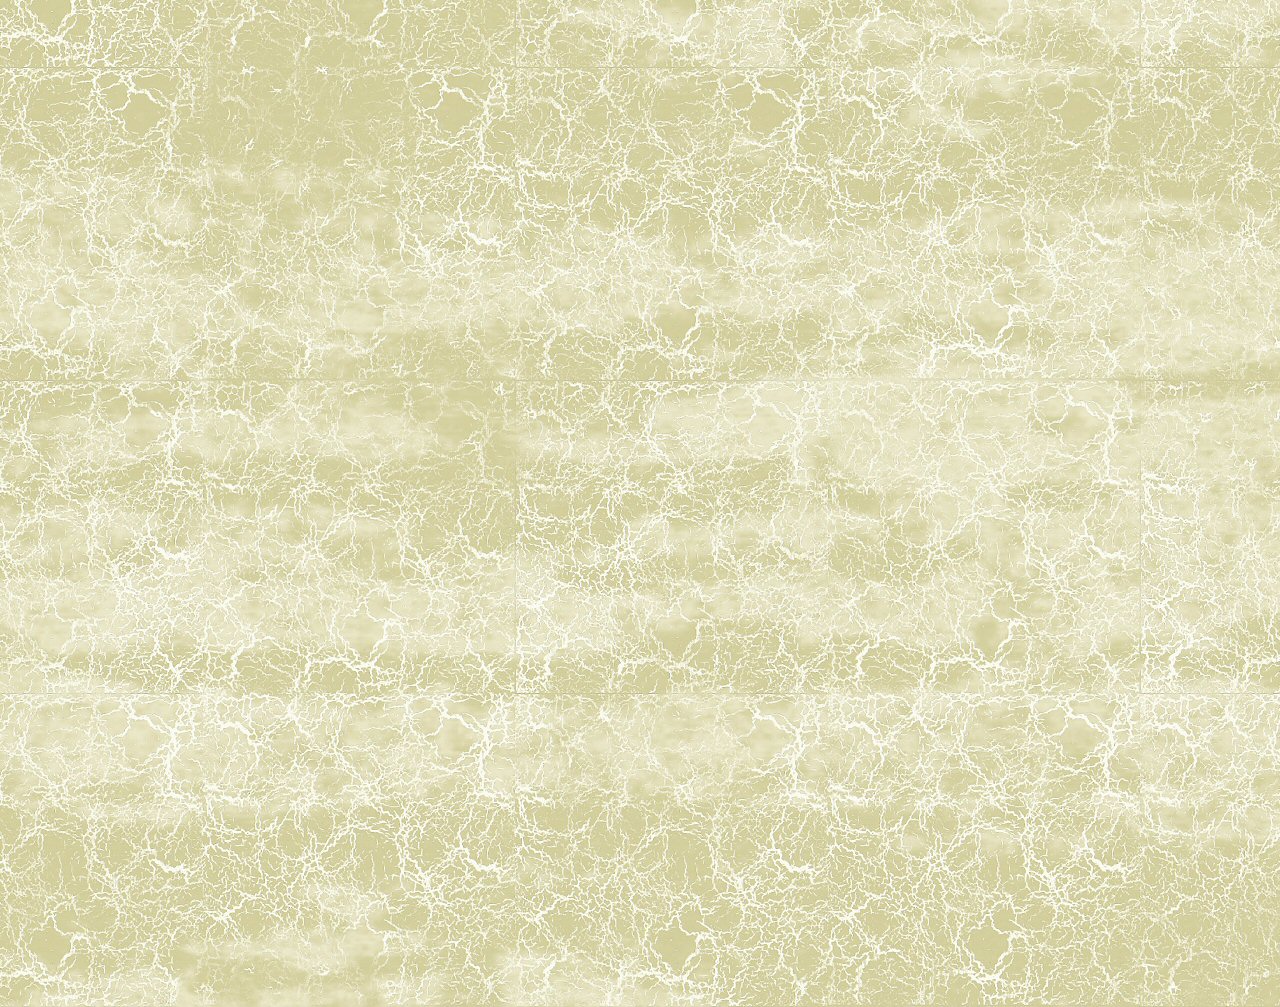 Marblesque Backgrounds